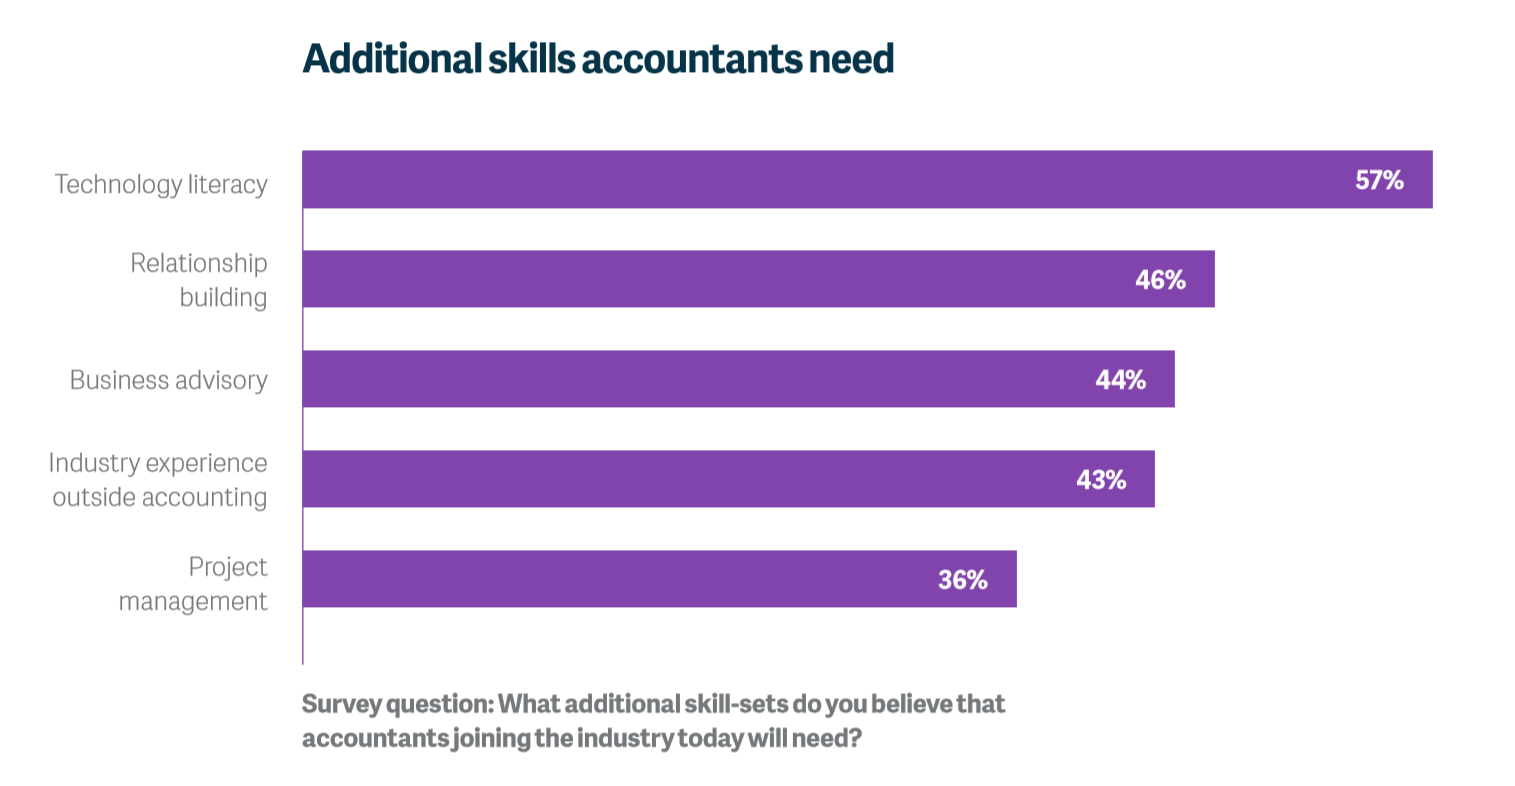 Additional skills needed for new accountants